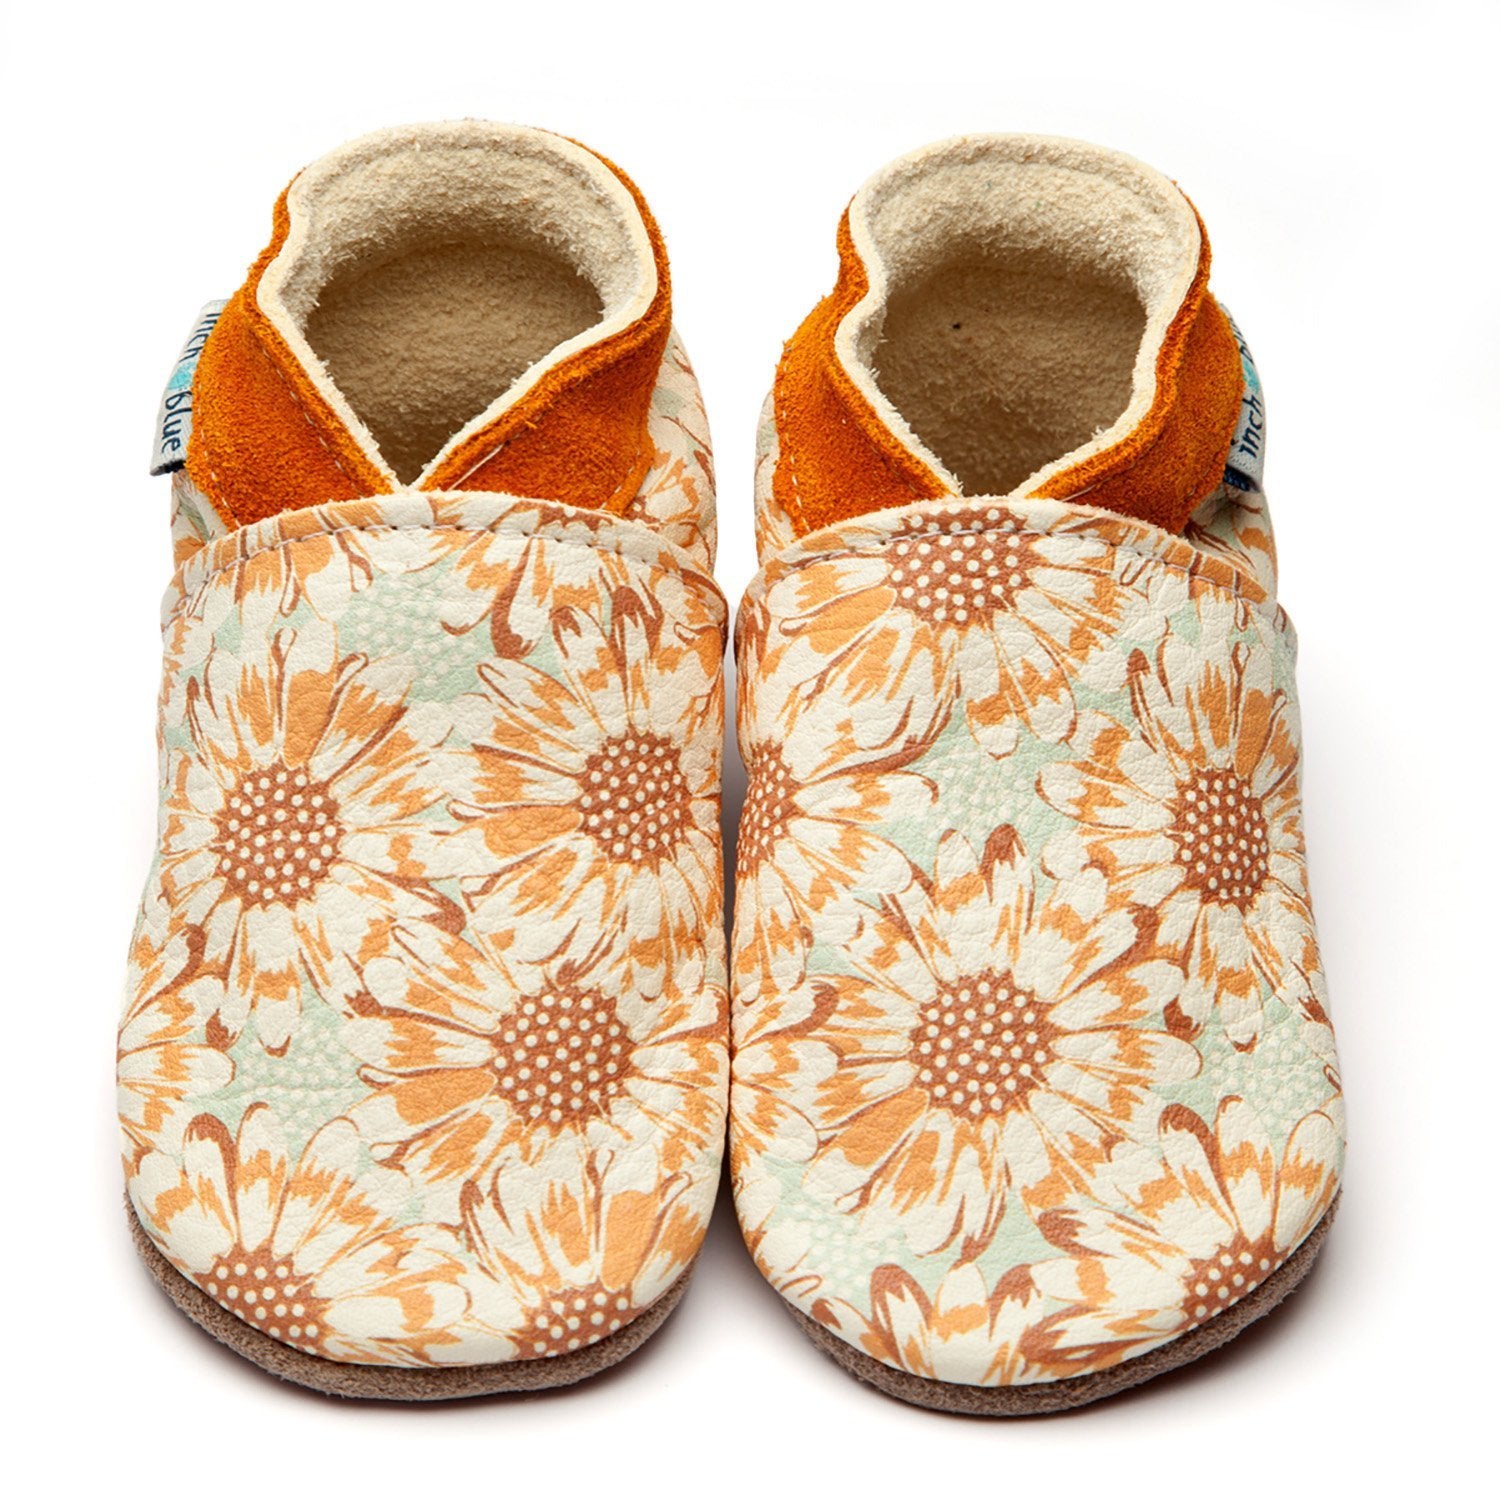 Inch Blue Baby Shoes Sunflower 4061 Footwear 0-6M / Gold,6-12M / Gold,12-18M / Gold